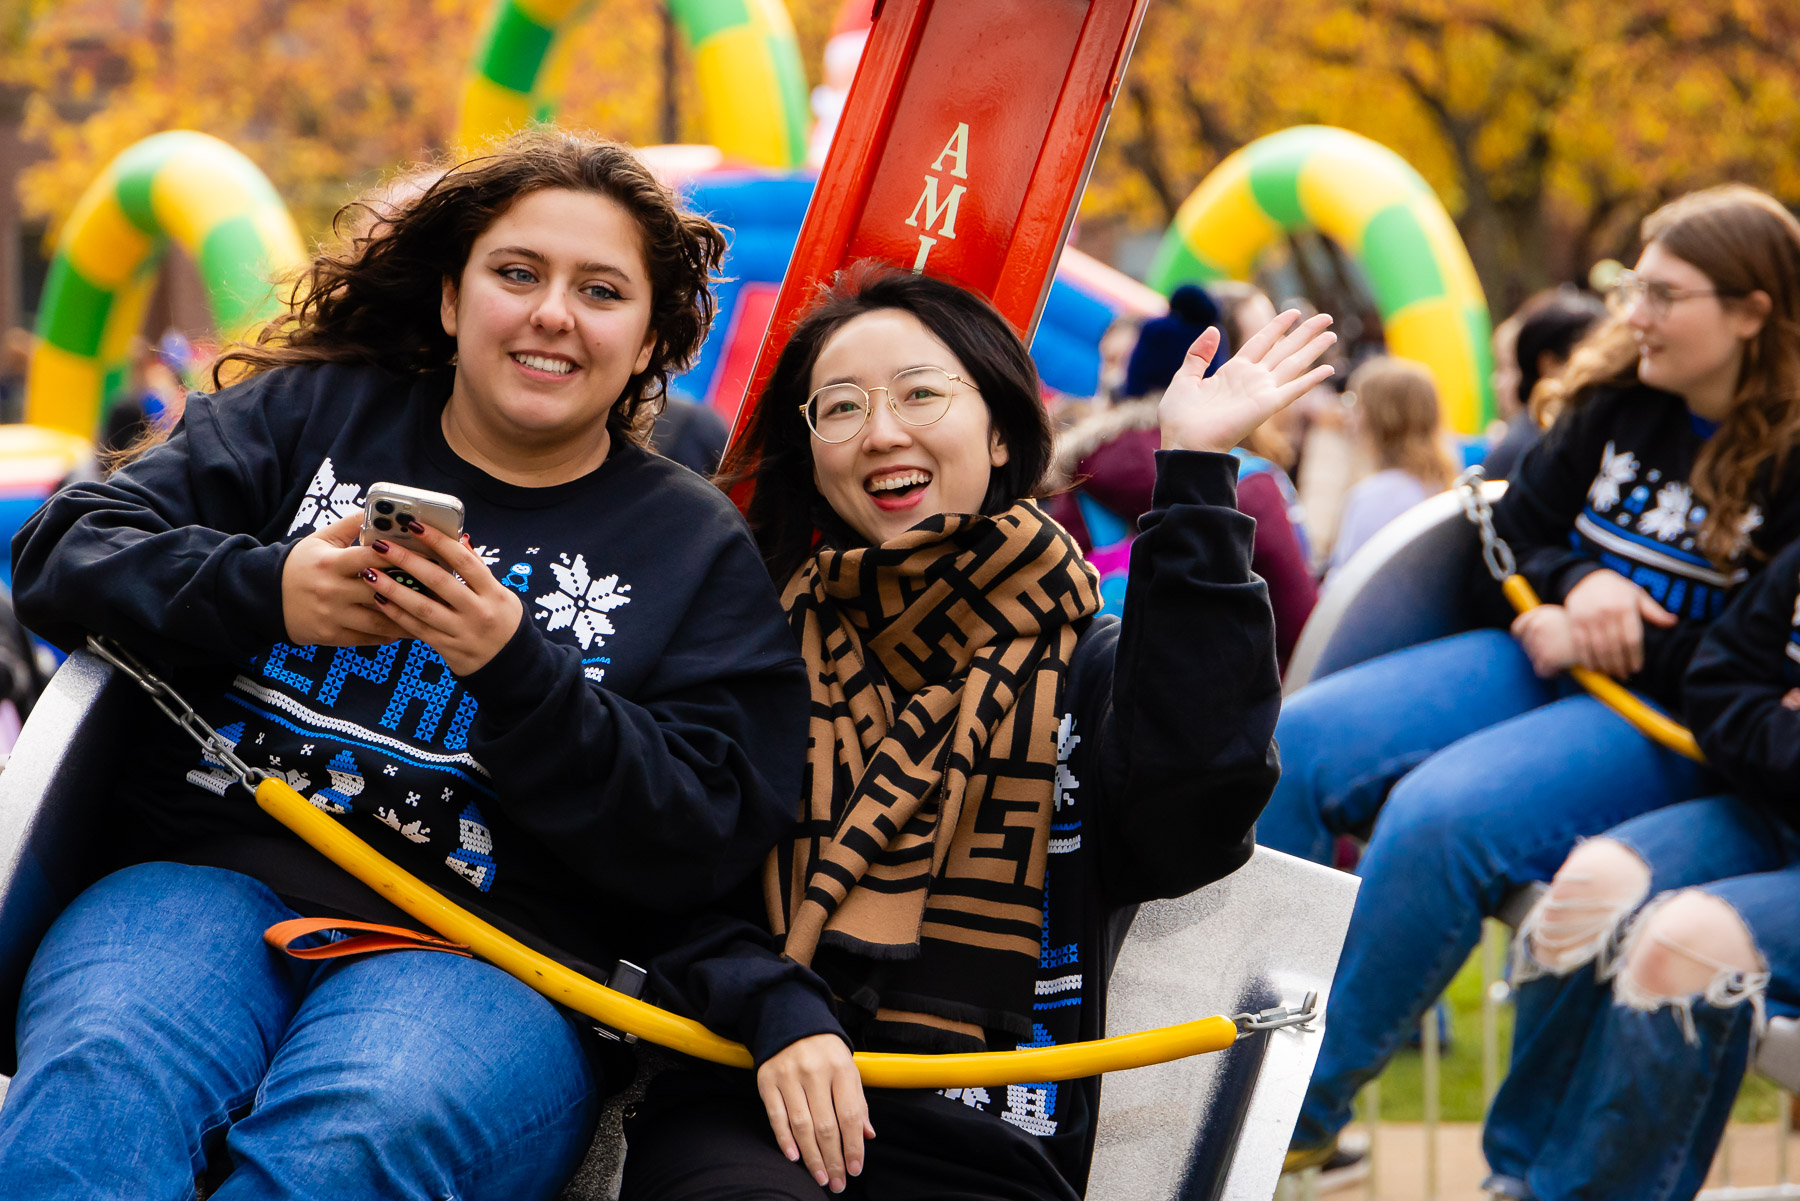 Students twirl on a carnival ride at the event. (Photo by Jeff Carrion / DePaul University) 